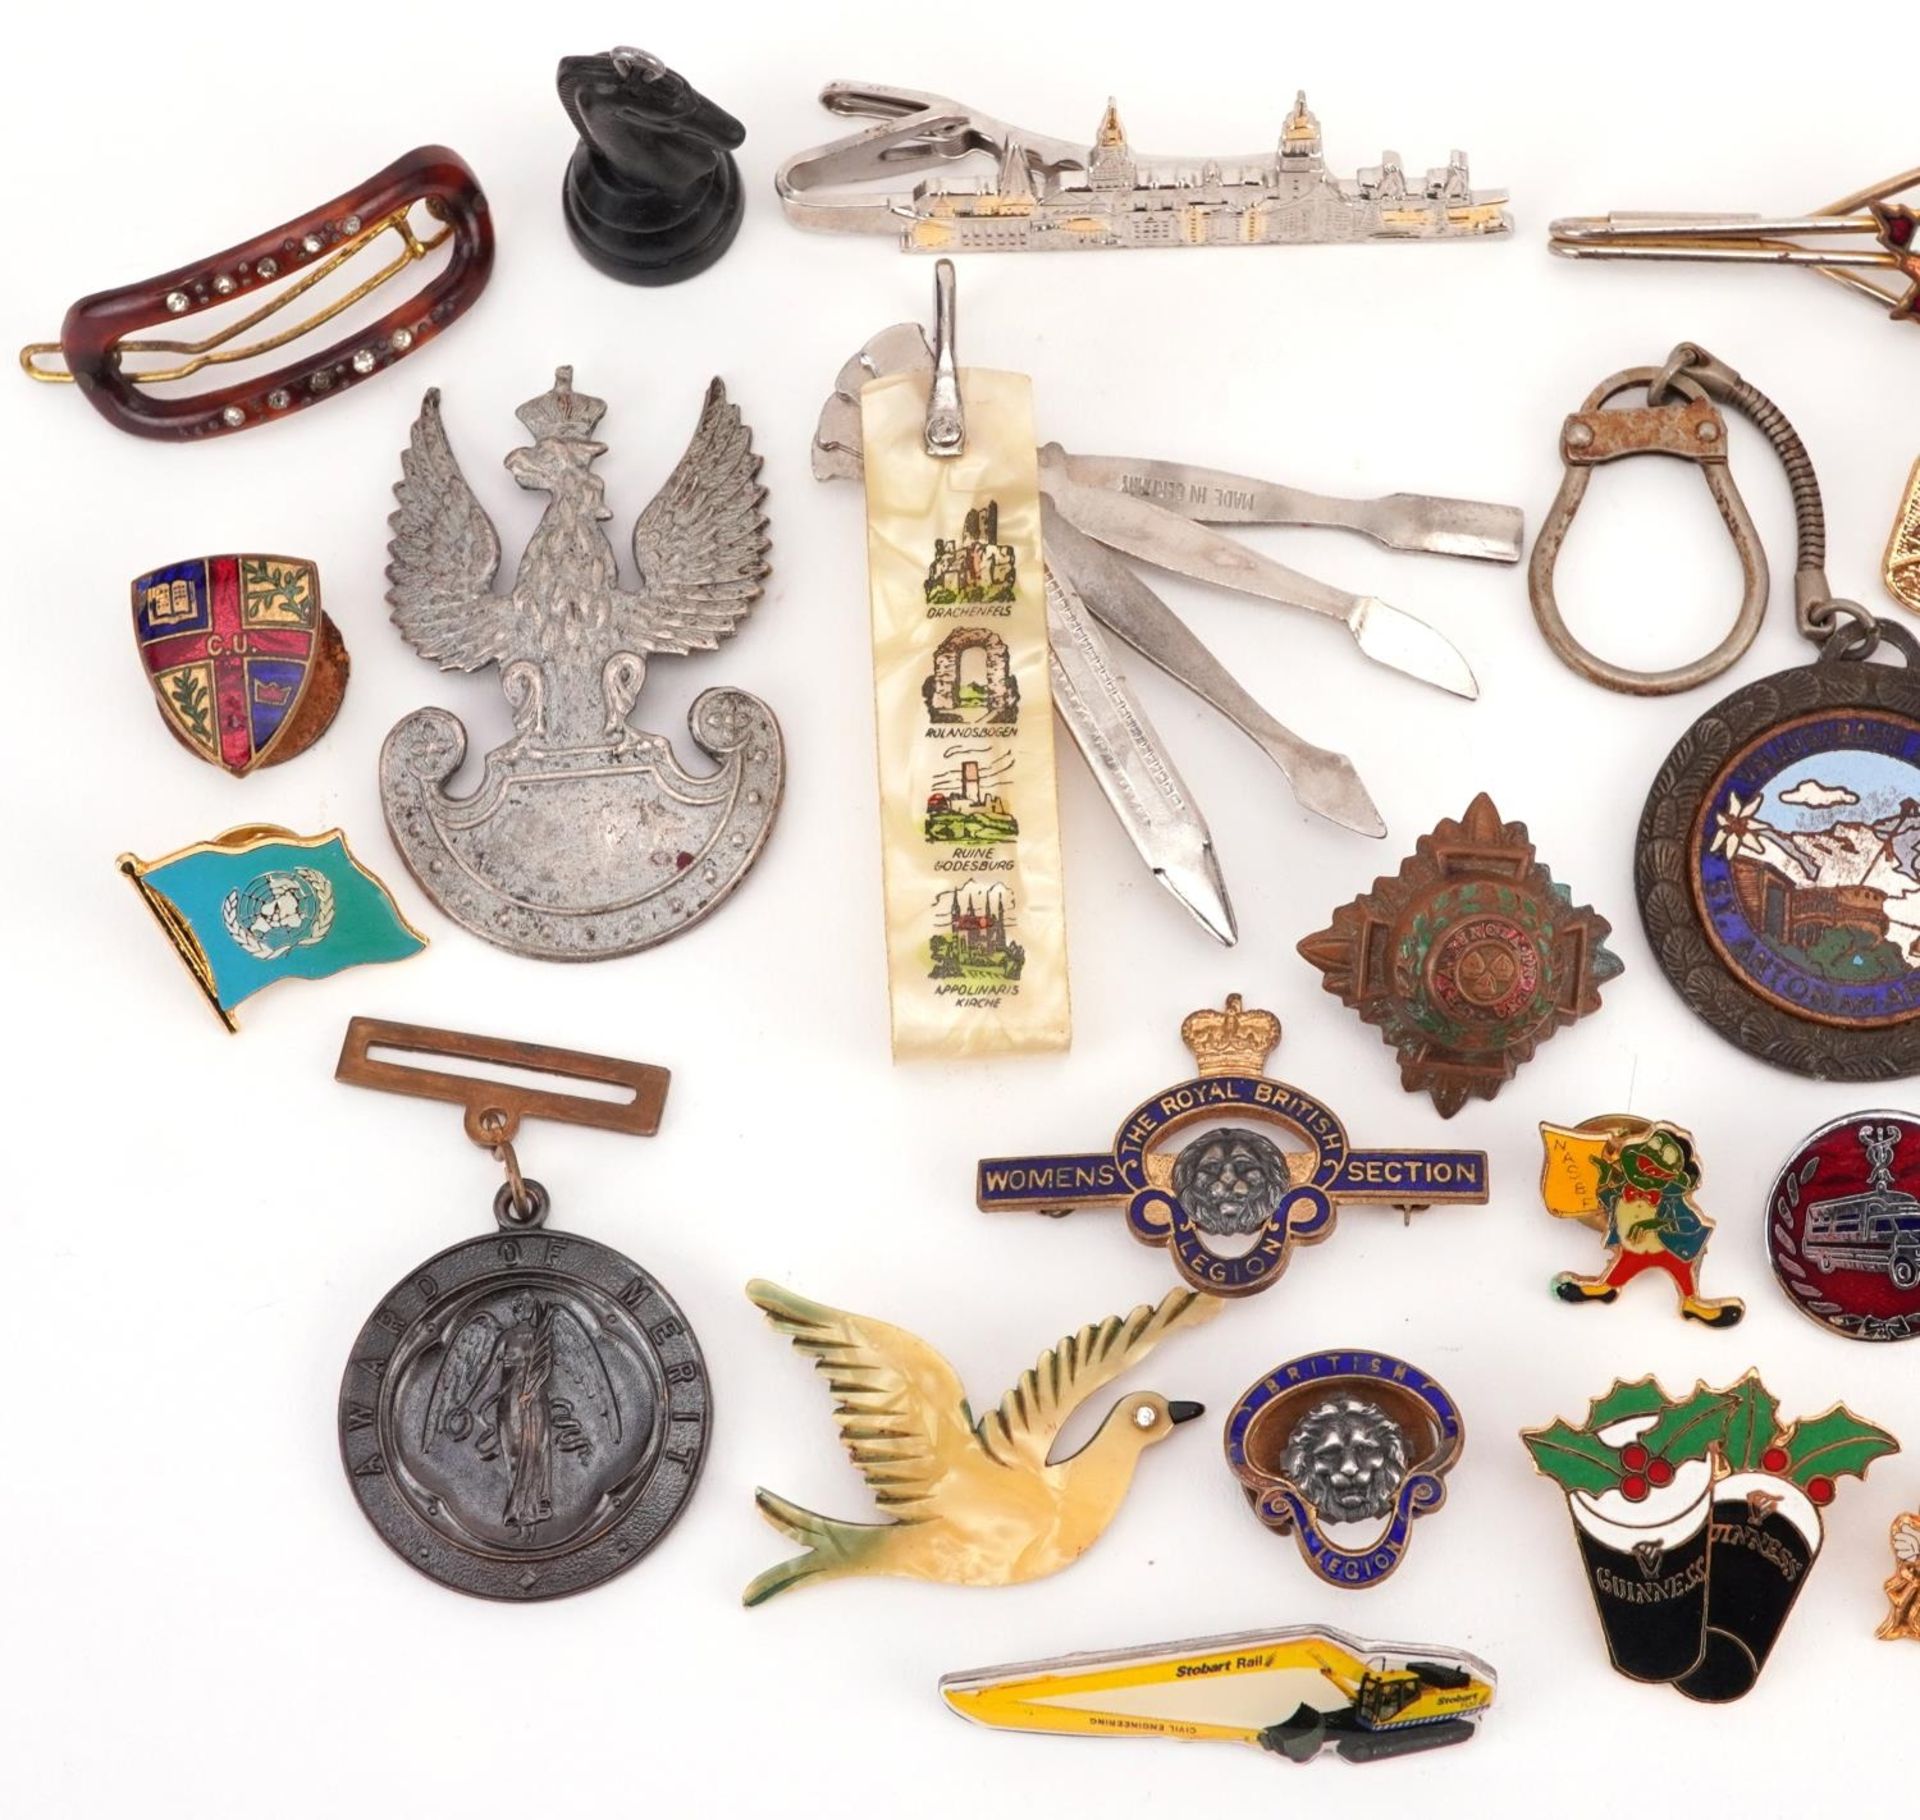 Vintage and later sundry items including military badges, brooches and stickpins - Image 2 of 4